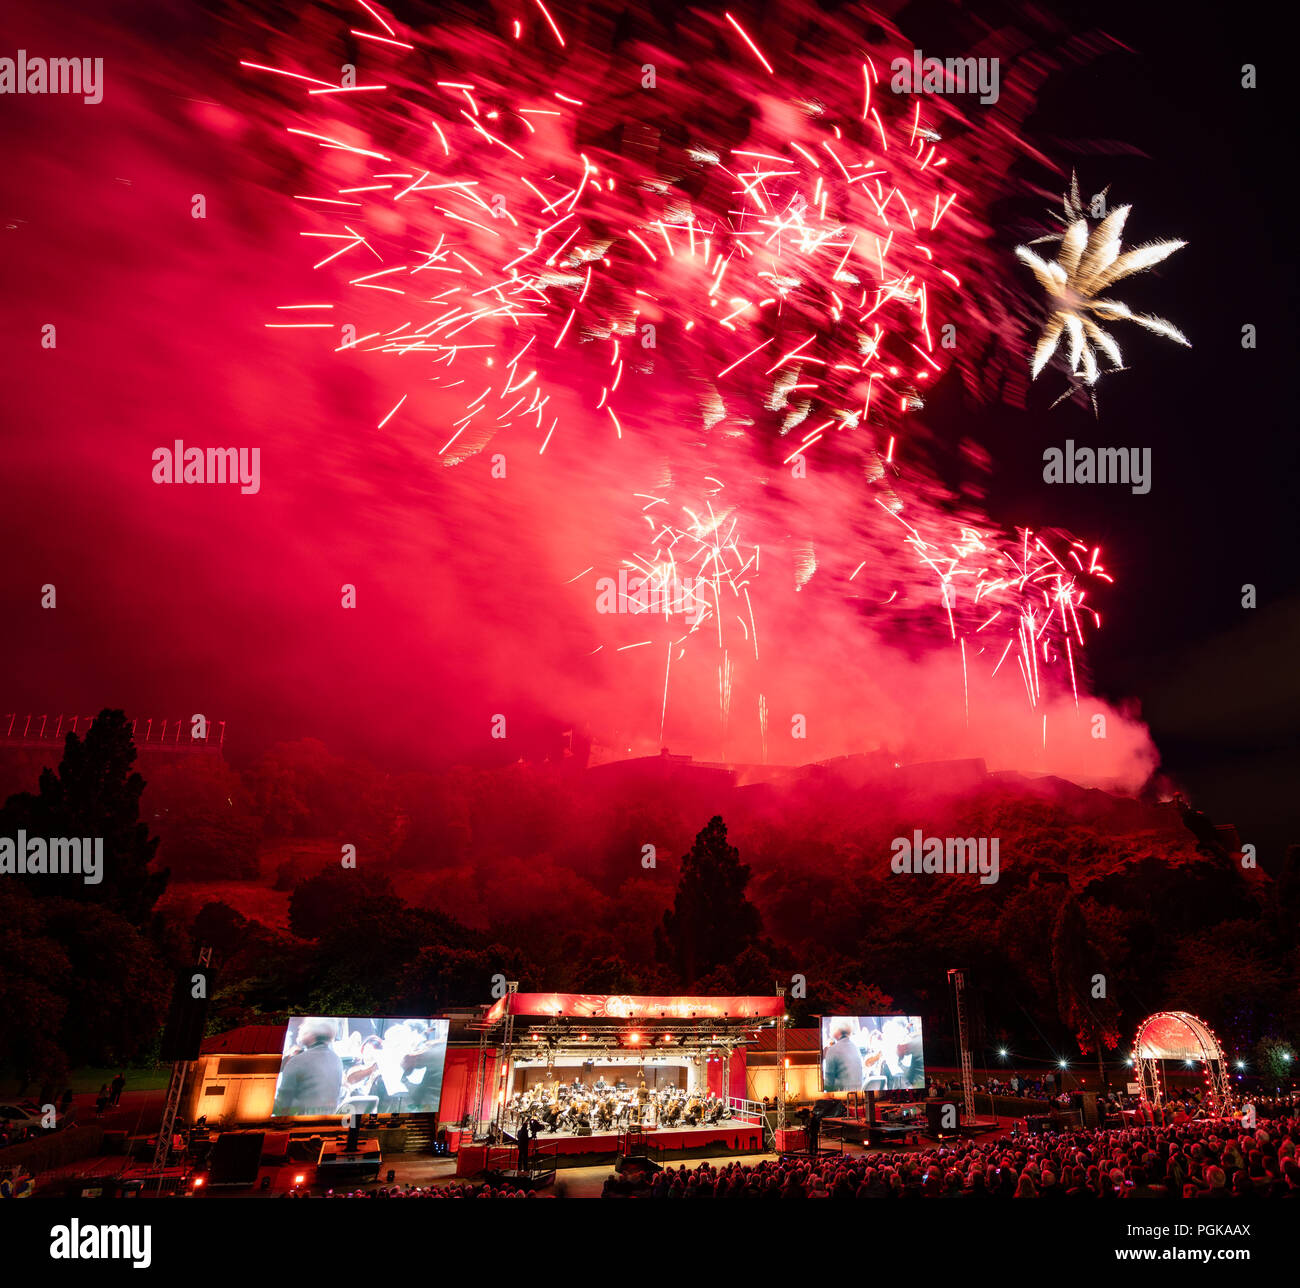 Edinburgh, Scotland, UK. 27 August, 2018. The Edinburgh International Festival concluded with the Virgin Money Fireworks Concert in Princes Street Gardens with a backdrop of Edinburgh Castle. Music by the Scottish Chamber Orchestra playing The Planets by Gustav Holst. Credit: Iain Masterton/Alamy Live News Stock Photo